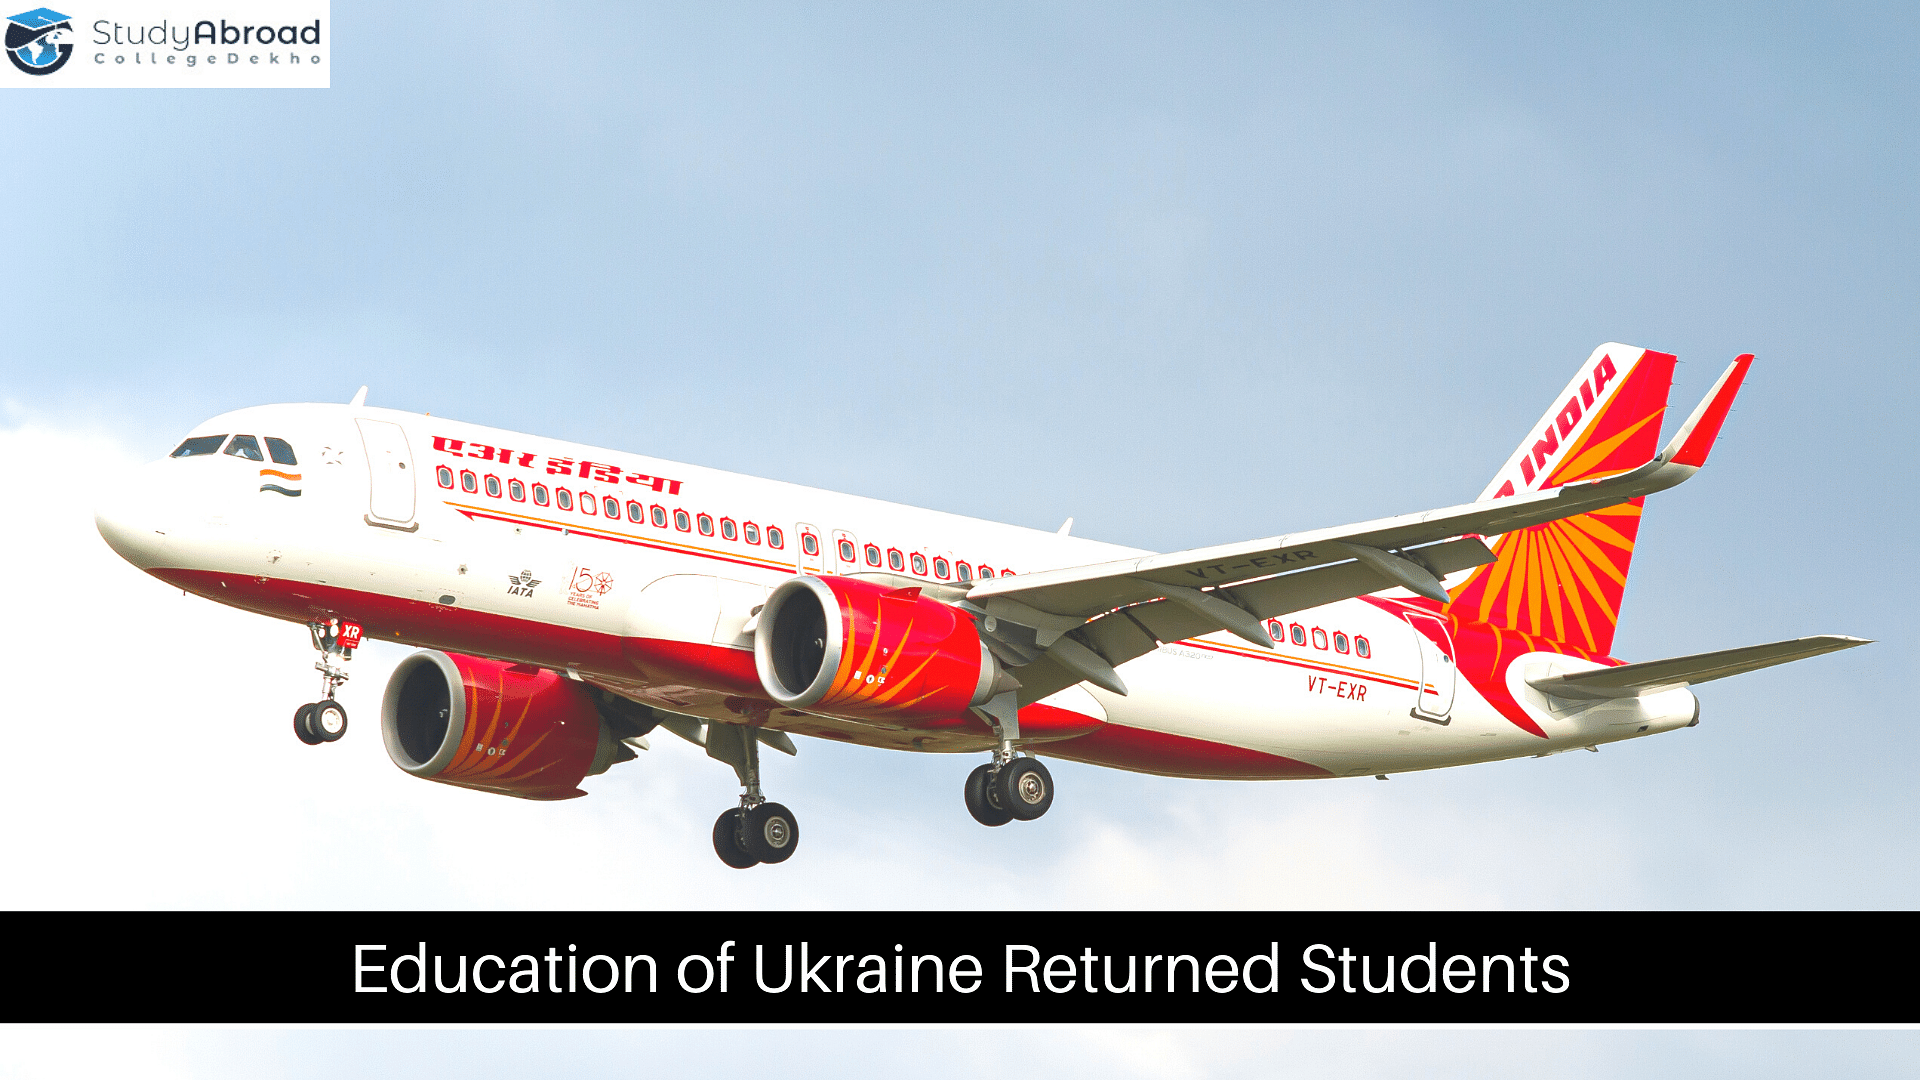 Future Education of Ukraine Return Indian Students, Government's promise of assistance on occasion of safe return